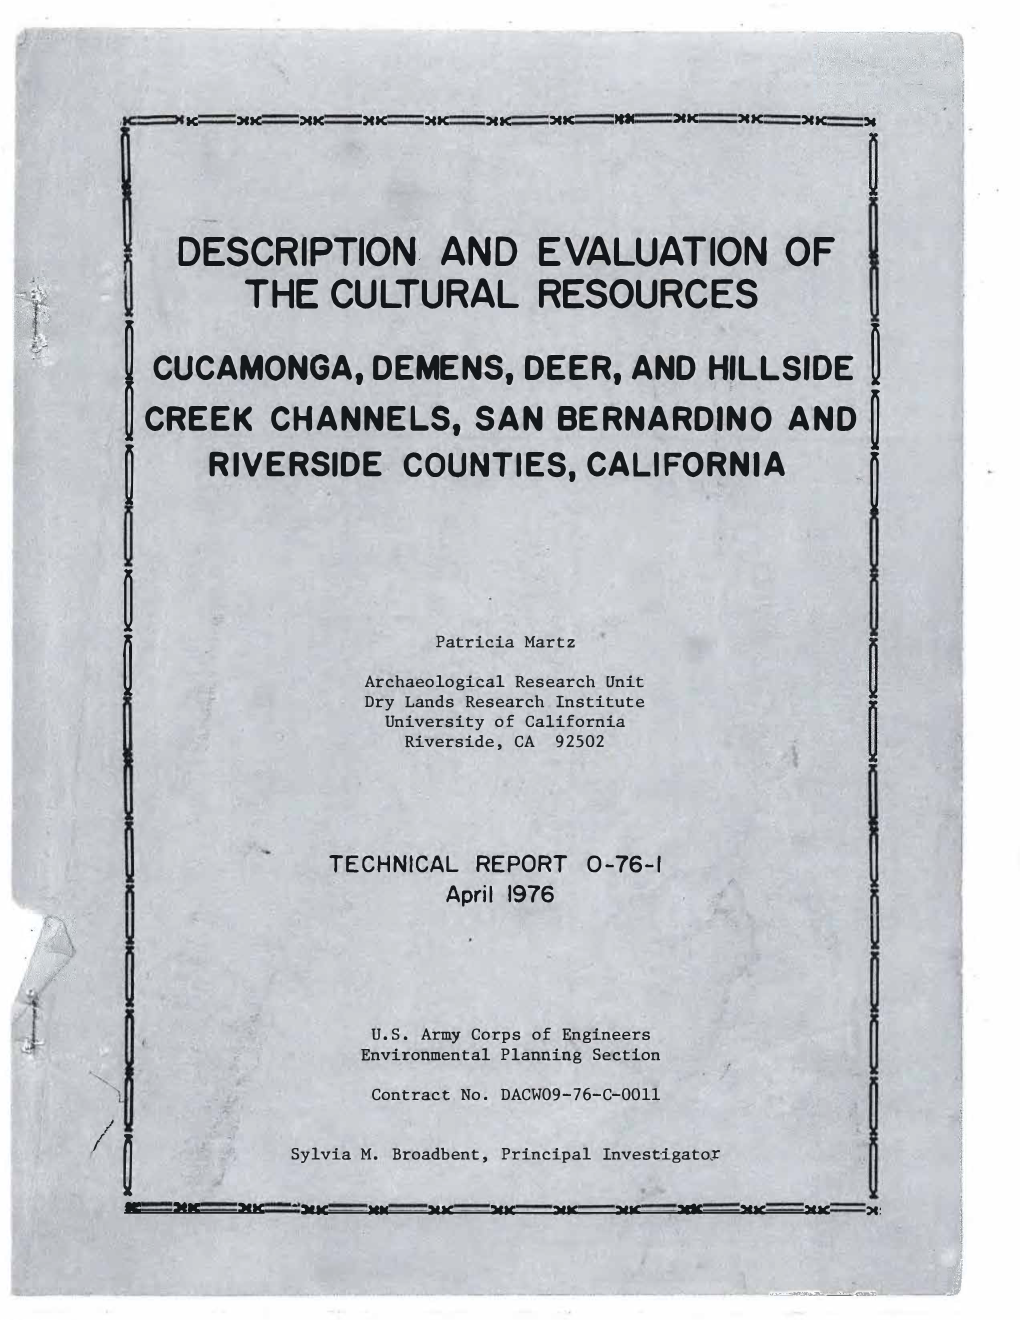 And Evaluation of the Cultural Resources Cucamonga, Demens, Deer, and Hillside Creek Channels, San Bern